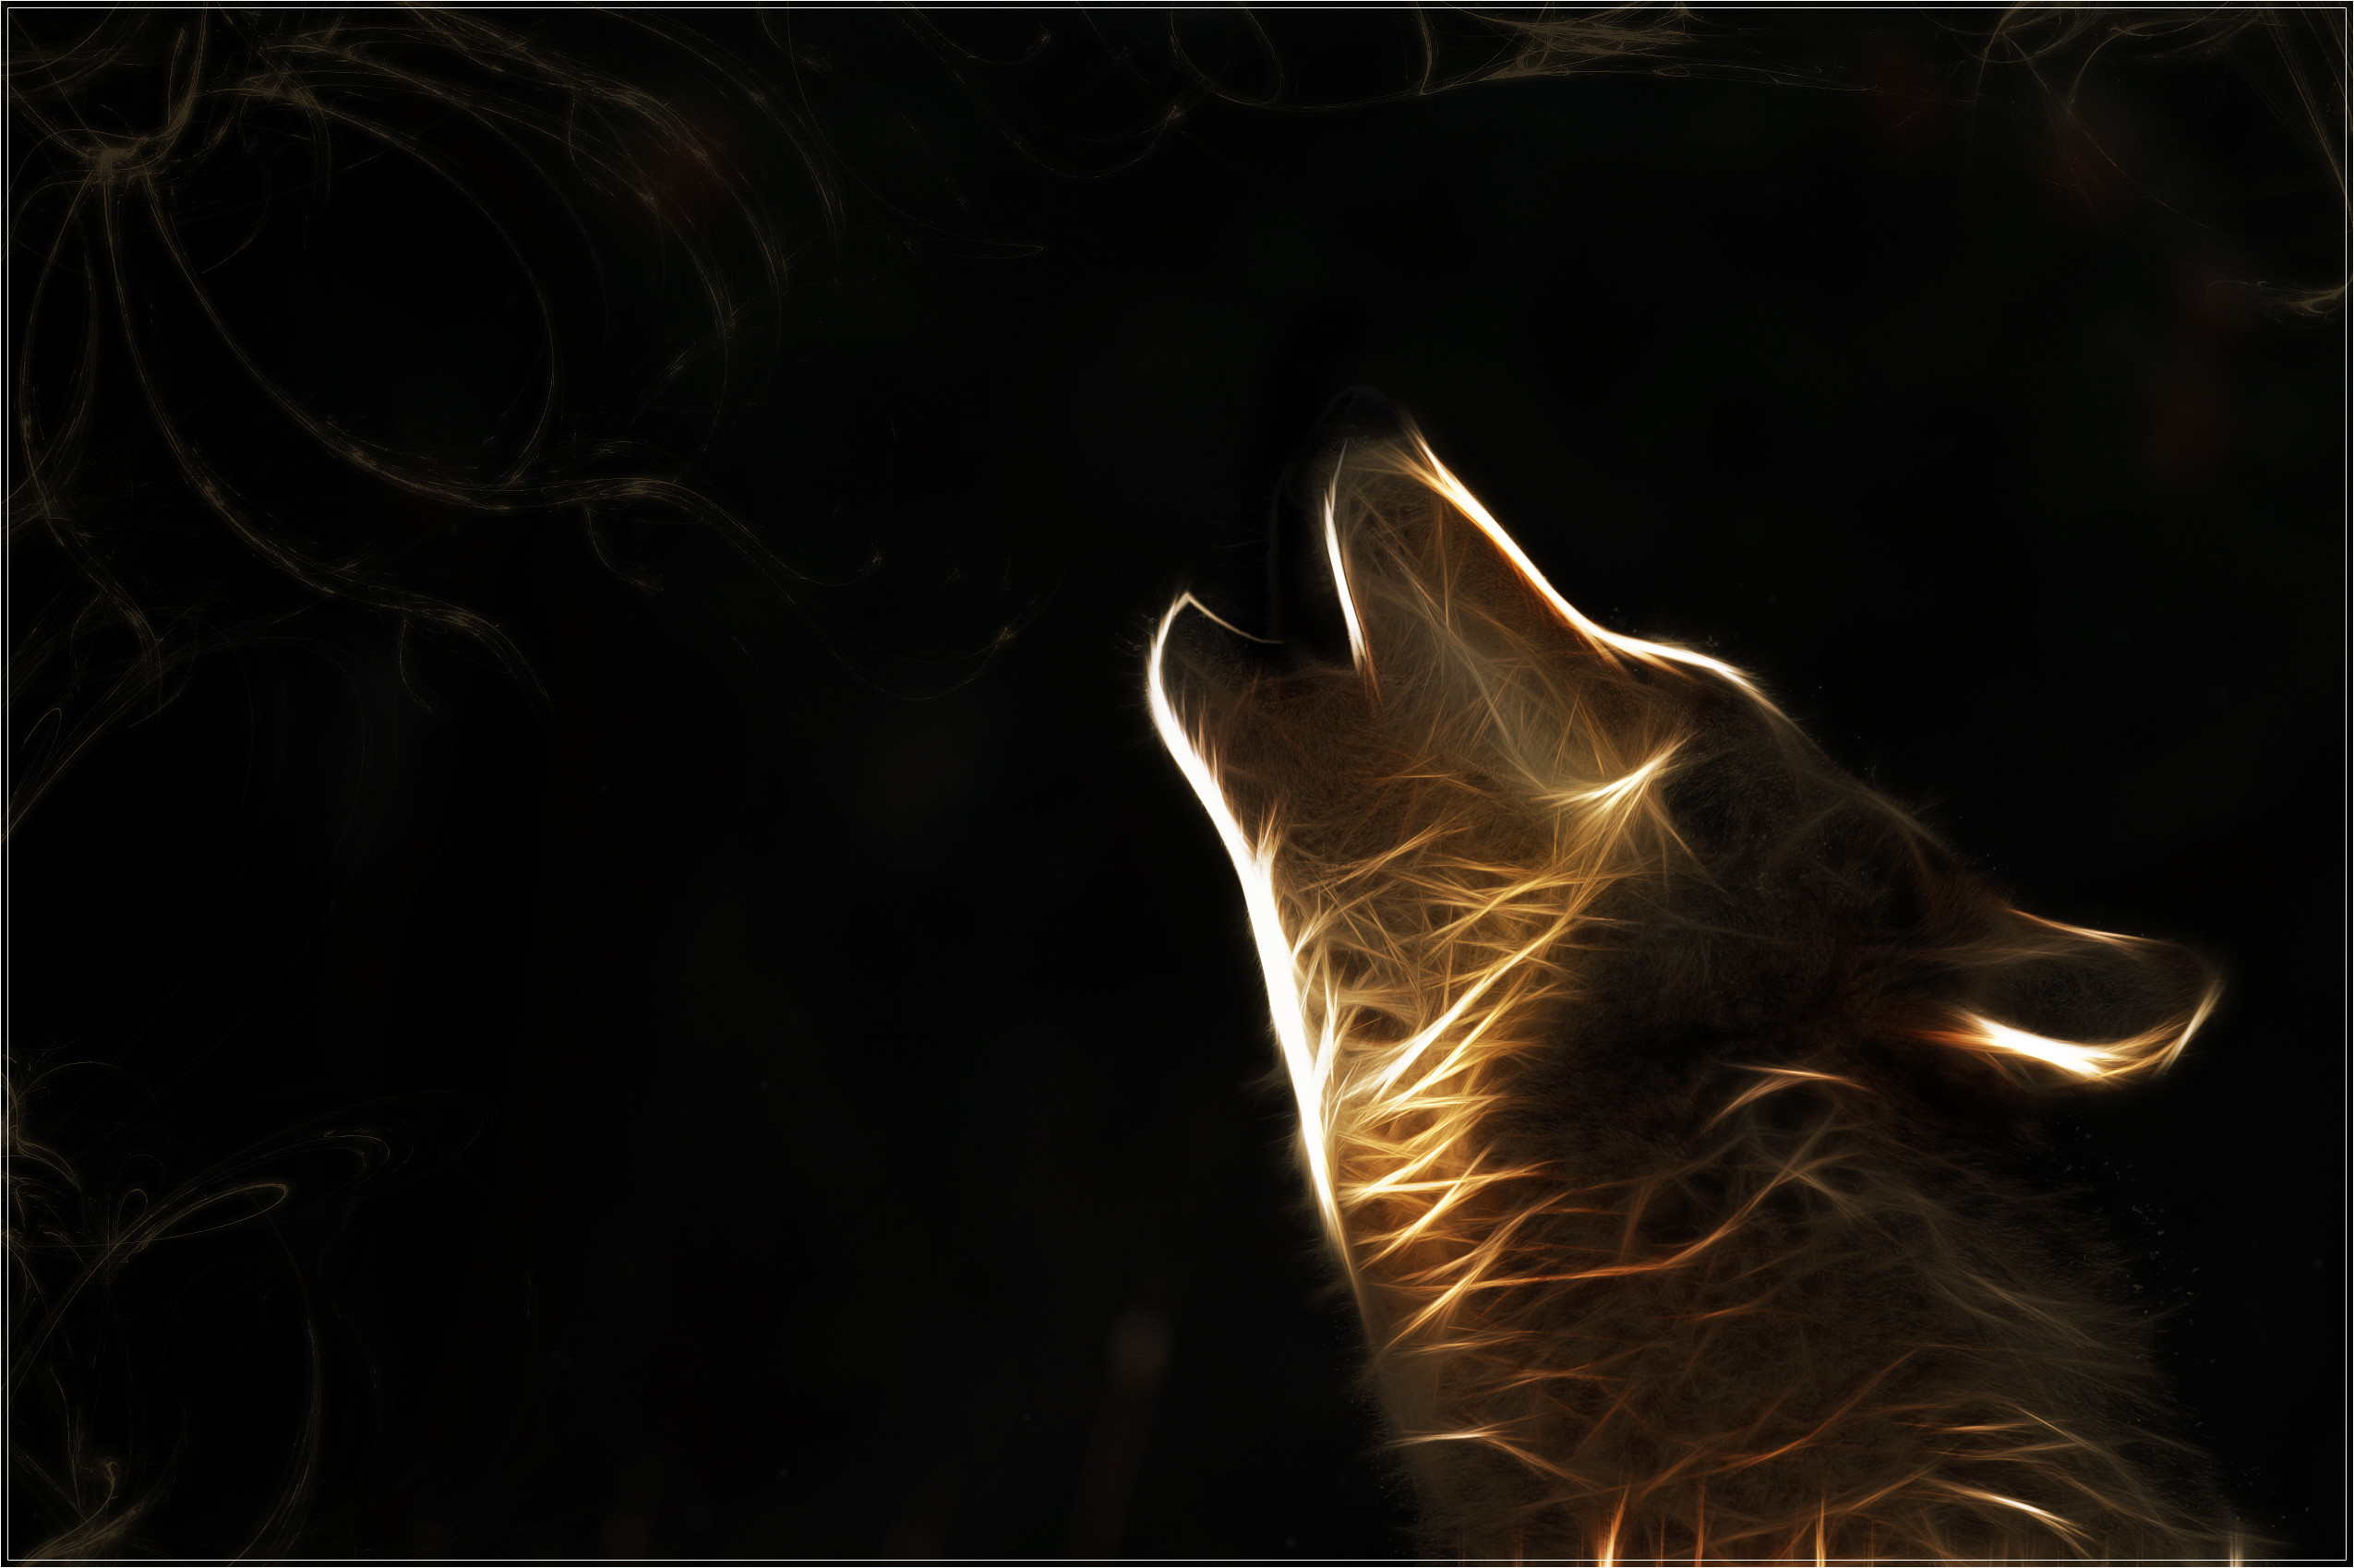 Awesome Pics Of Wolves Wallpapers